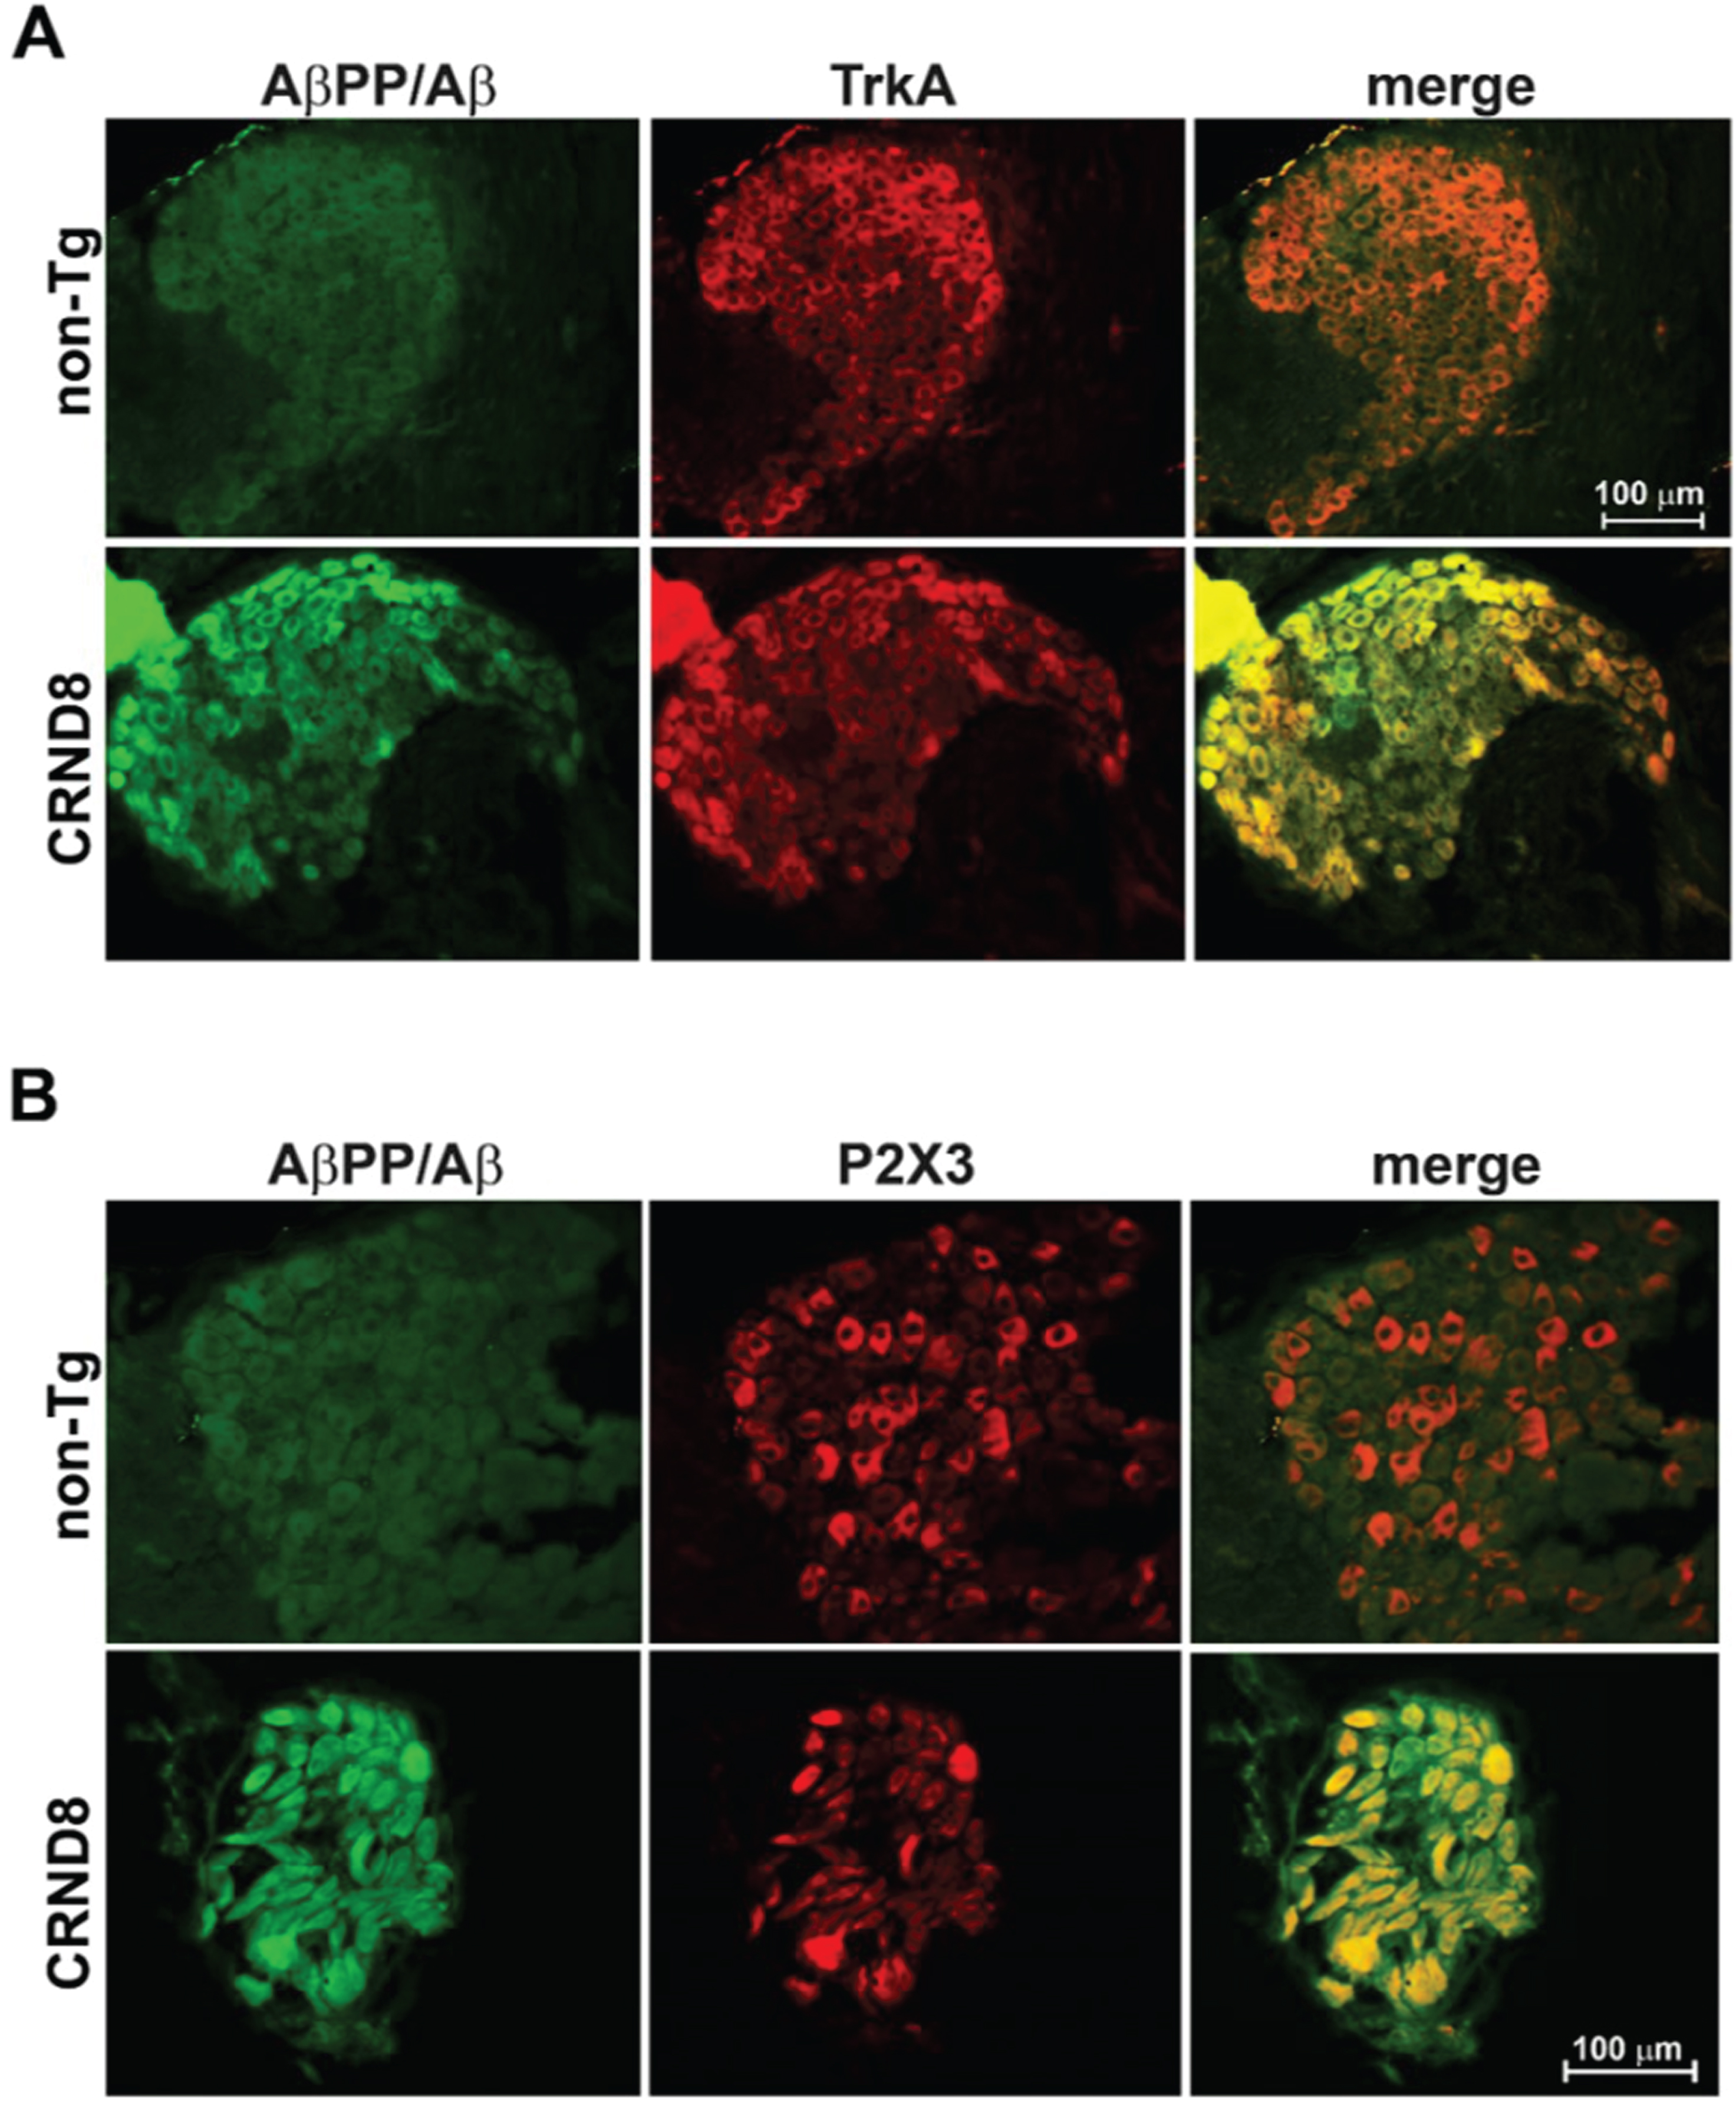 Sensory nociceptive neurons in the DRG of CRND8 mice all expressed AβPP/Aβ. Representative fluorescence images of DRG neurons of CRND8 mice labeled with AβPP/Aβ and either TrkA (A –bottom panel) or P2X3 (B –bottom panel) as markers for peptidergic and non-peptidergic nociceptors, respectively. Representative fluorescence images of DRG neurons of non-Tg mice labeled with AβPP/Aβ and either TrkA (A –top panel) or P2X3 (B –top panel) are shown for comparison.